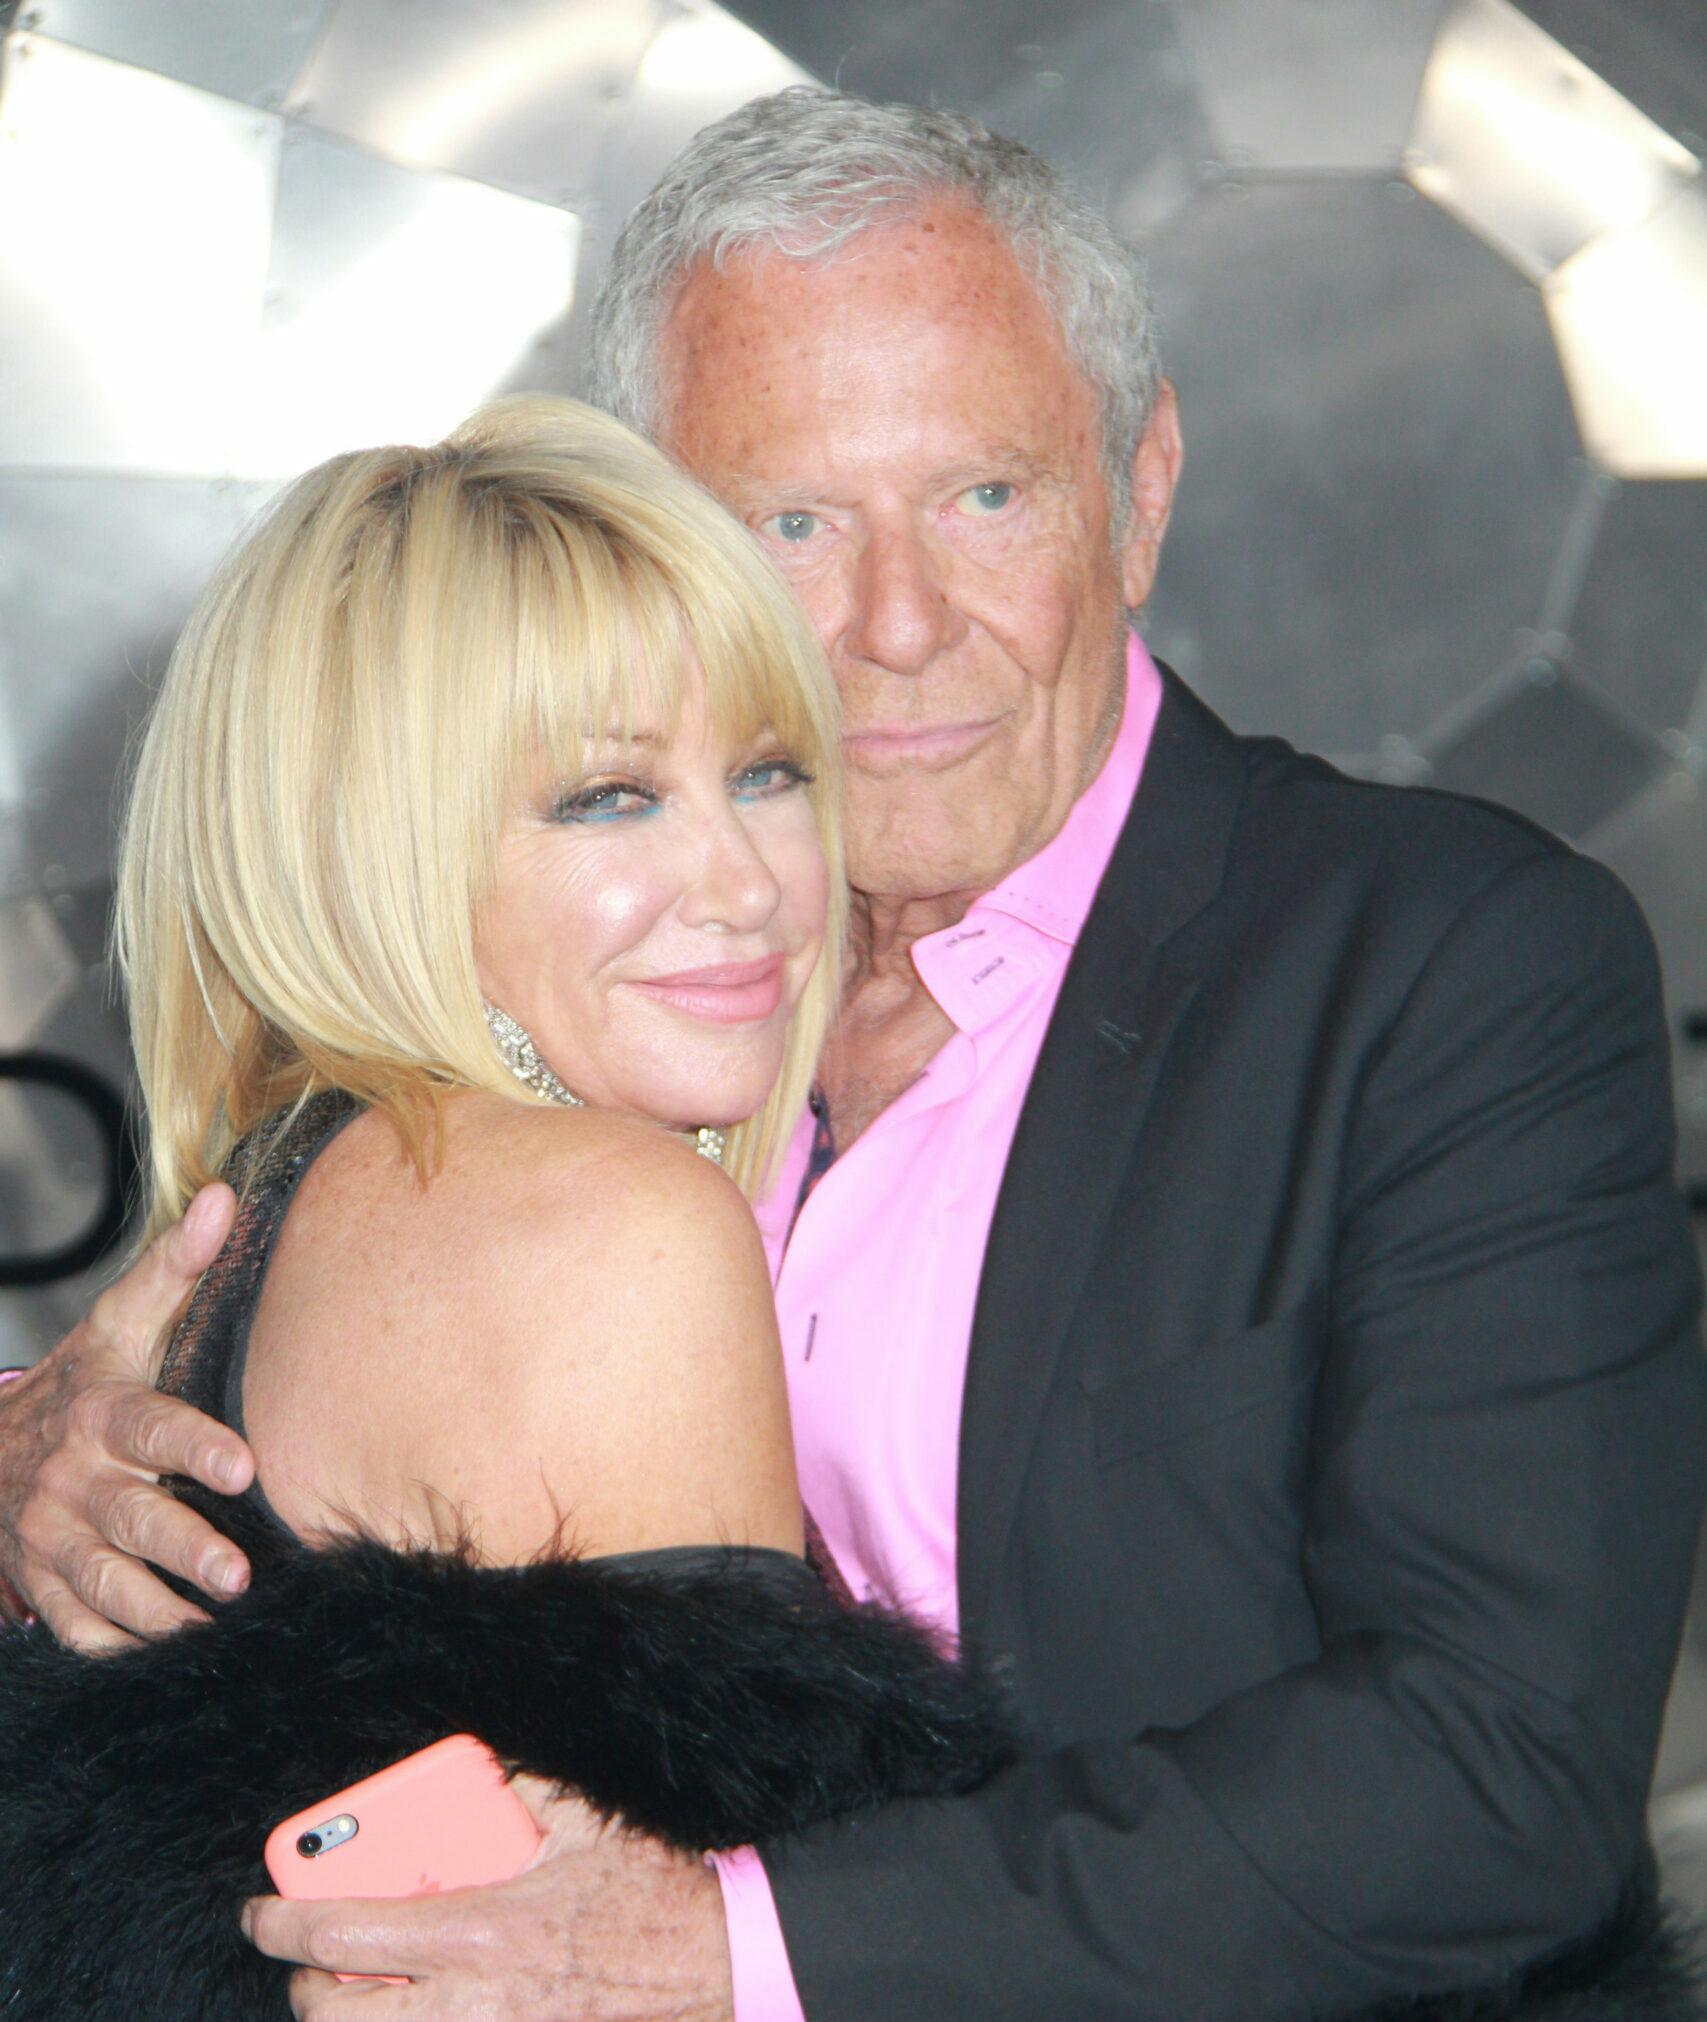 Suzanne Somers & Alan Hamel at The World Premiere of "Passengers"